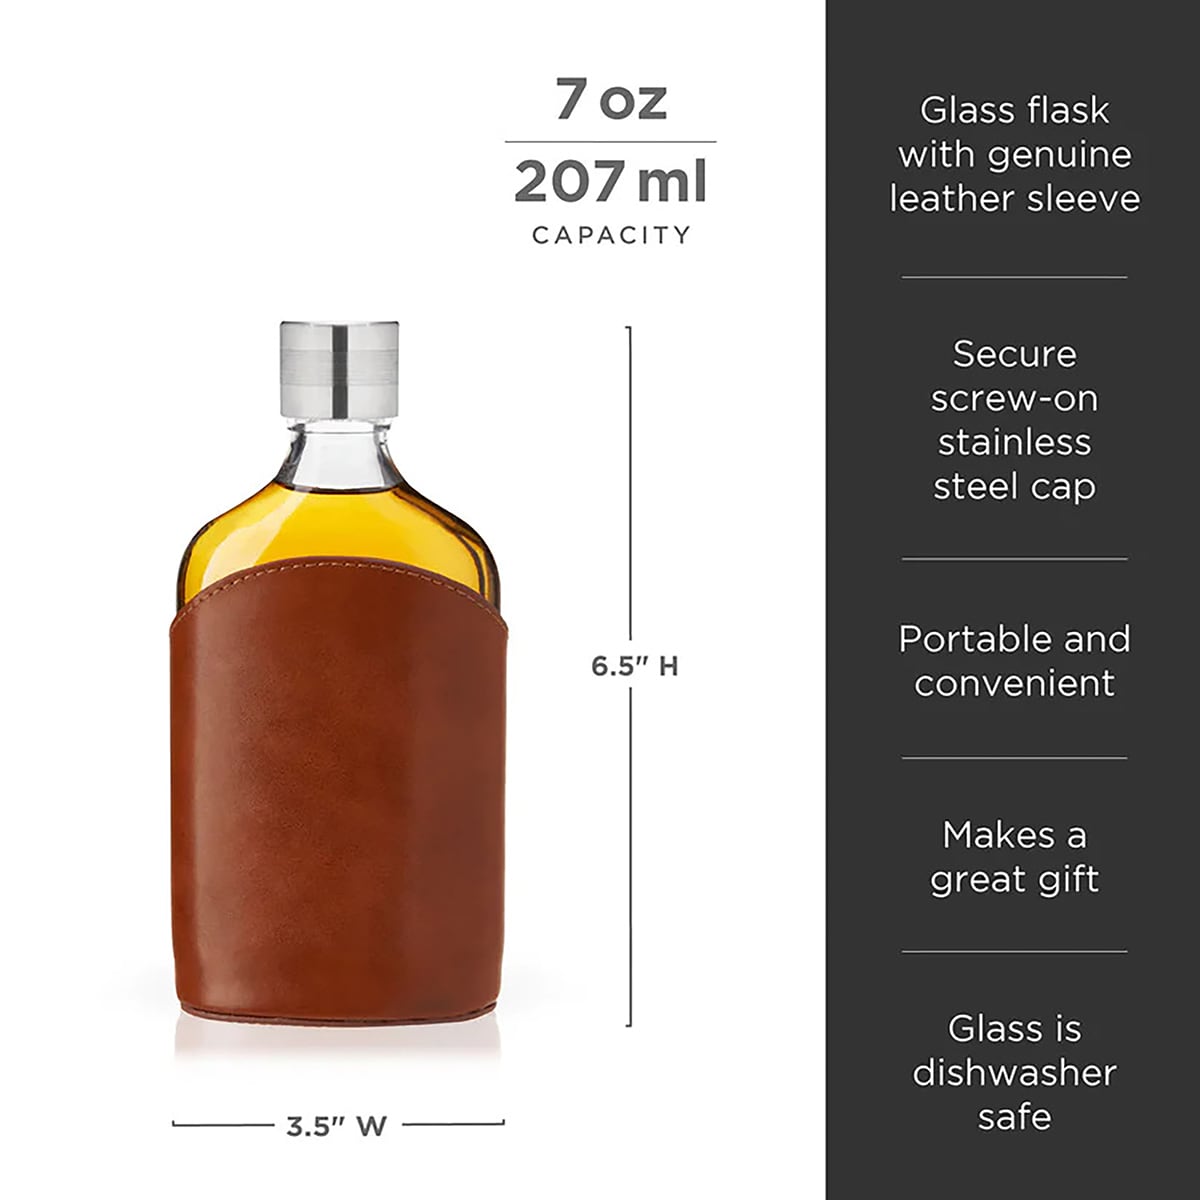 Parker Custom Glass Flask with Brown Leather Wrap